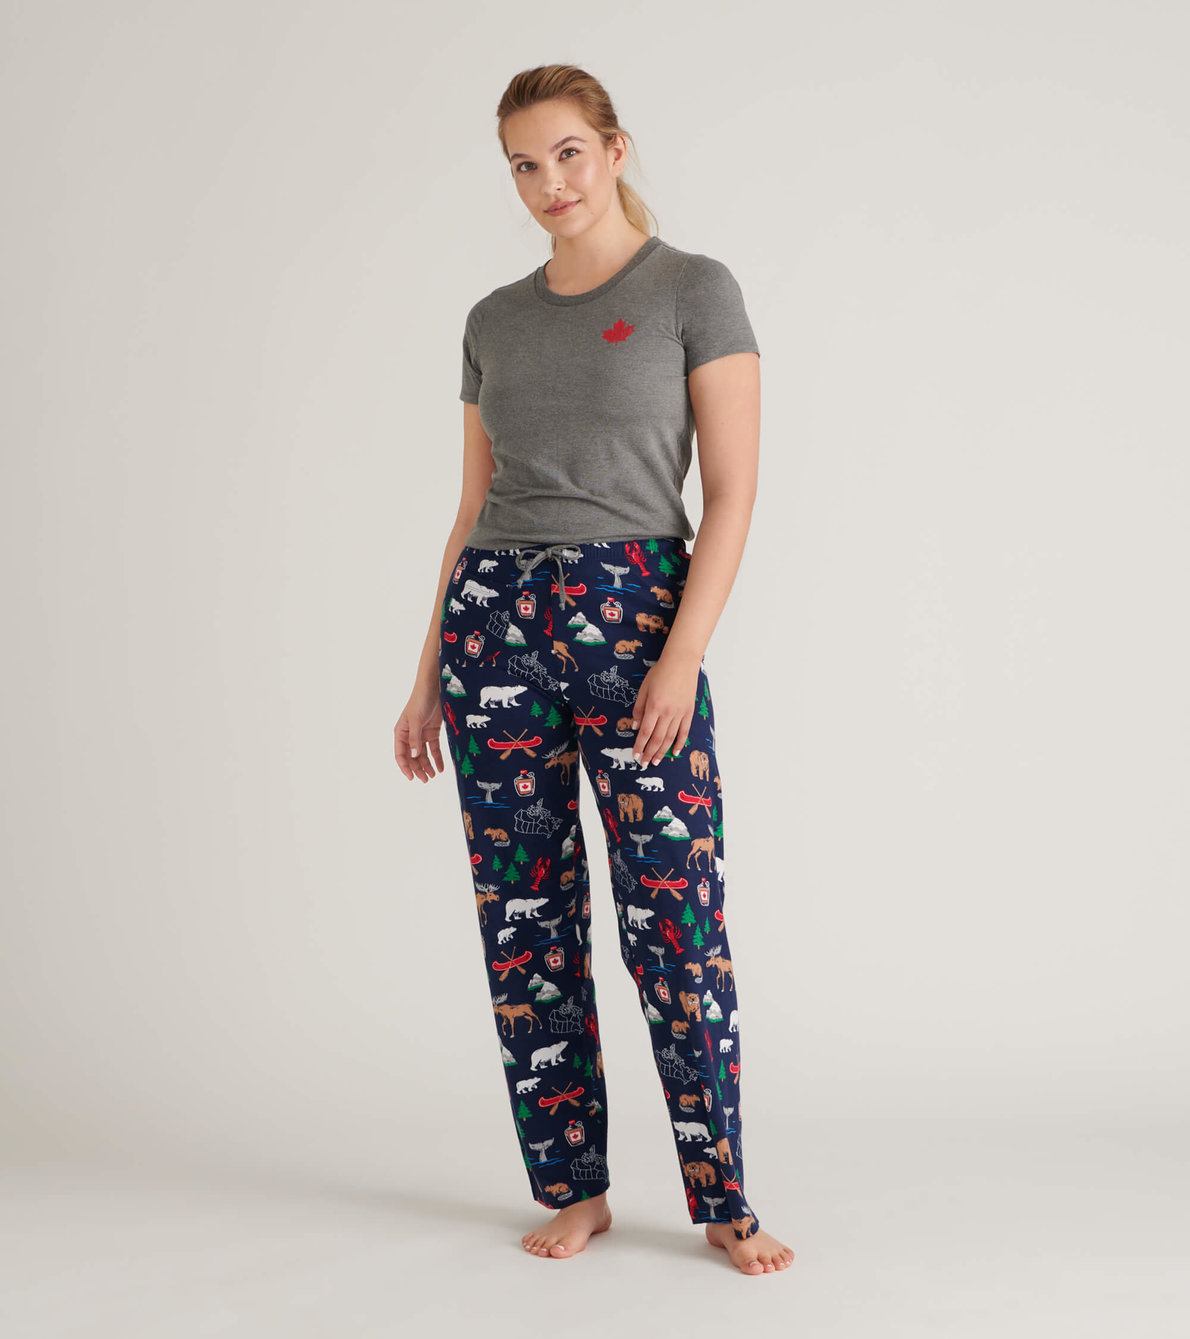 View larger image of True North Women's Jersey Pajama Pants